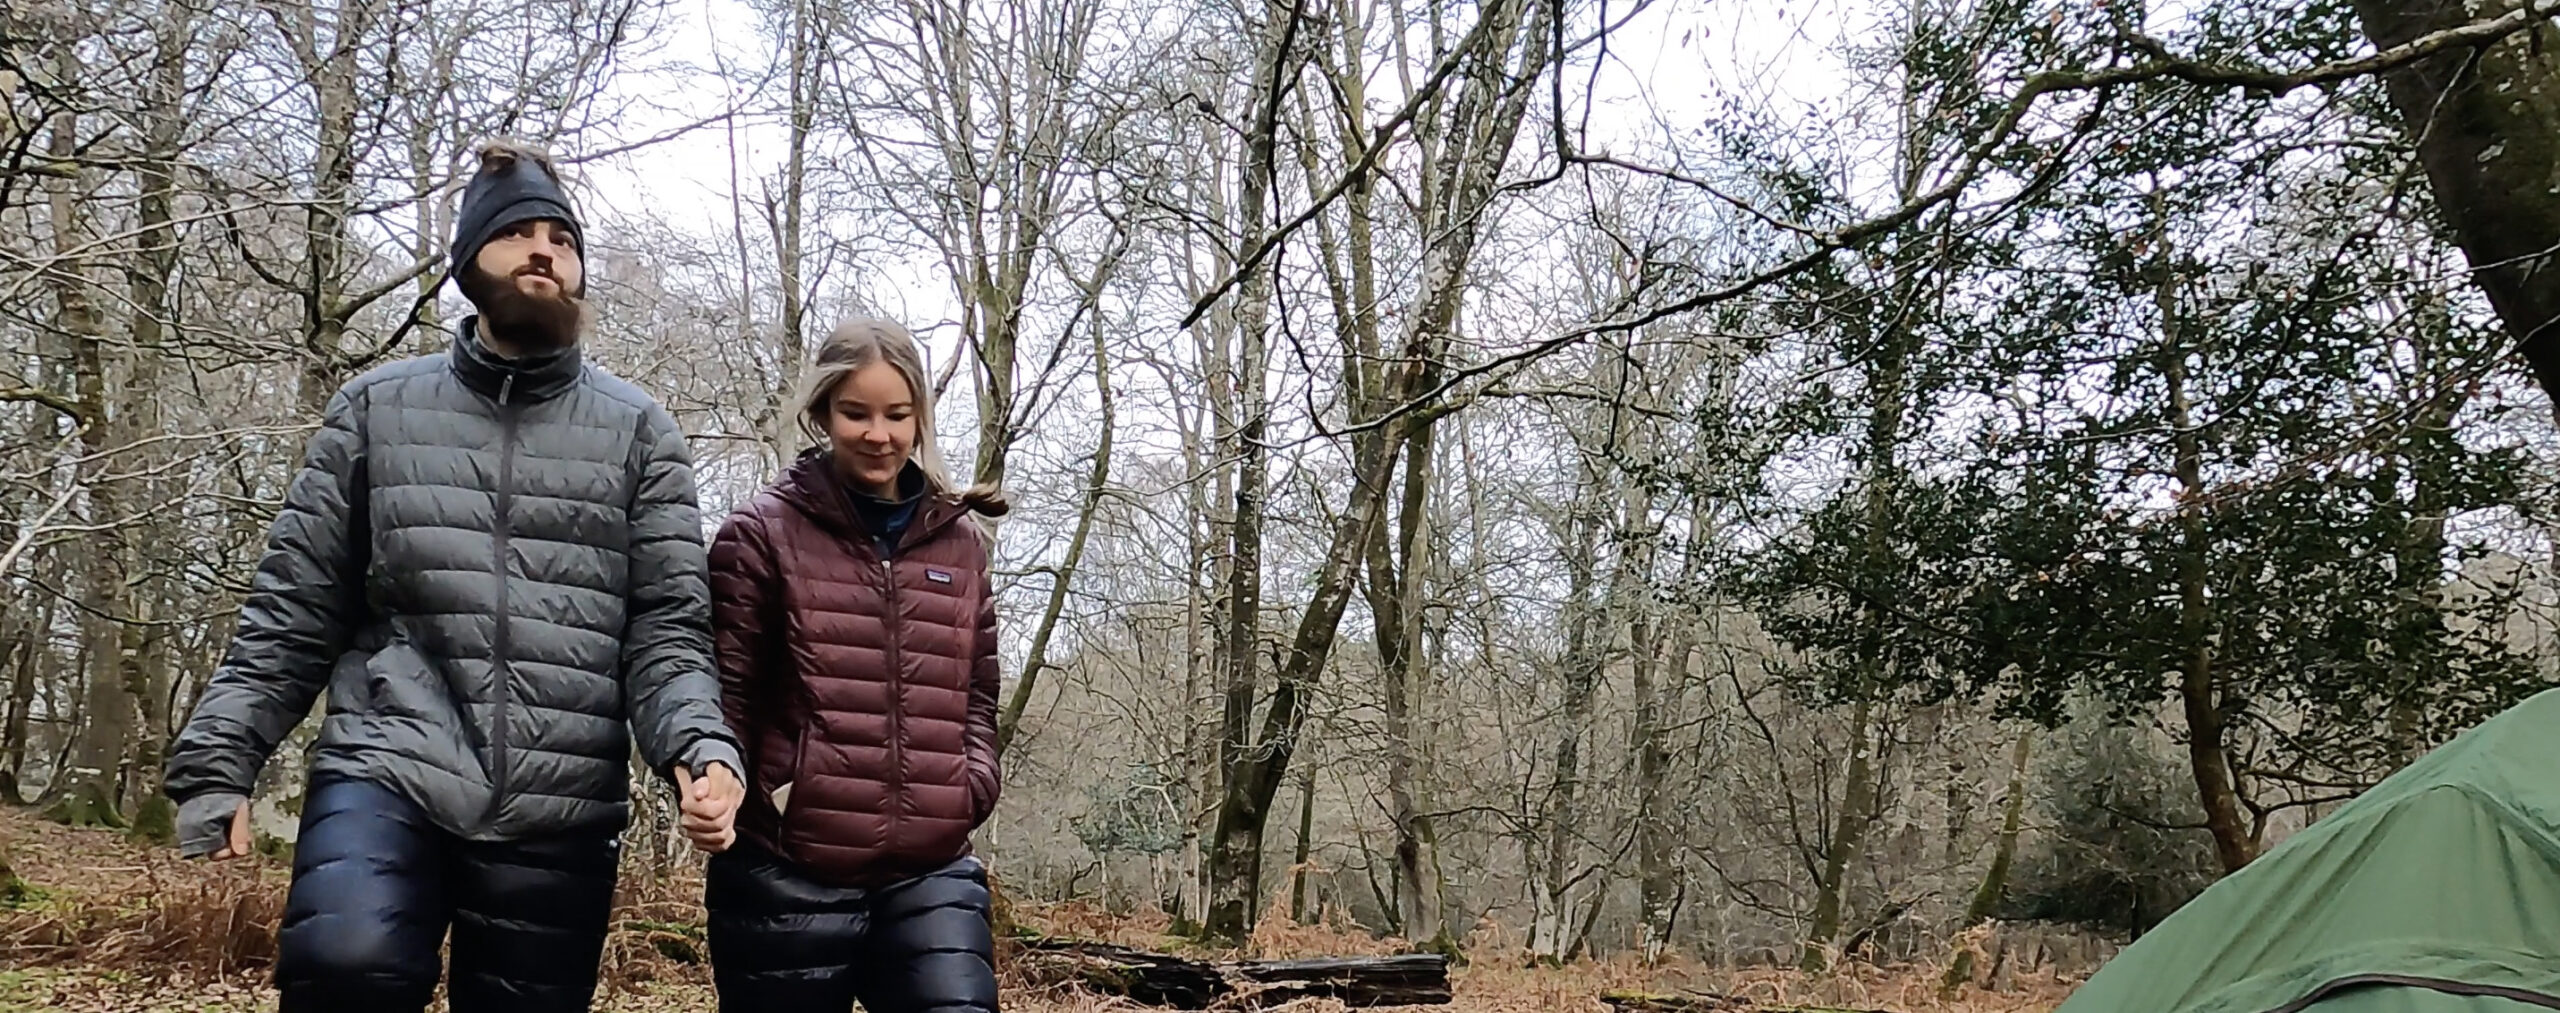 Video | Forest Camping over Winter Solstice